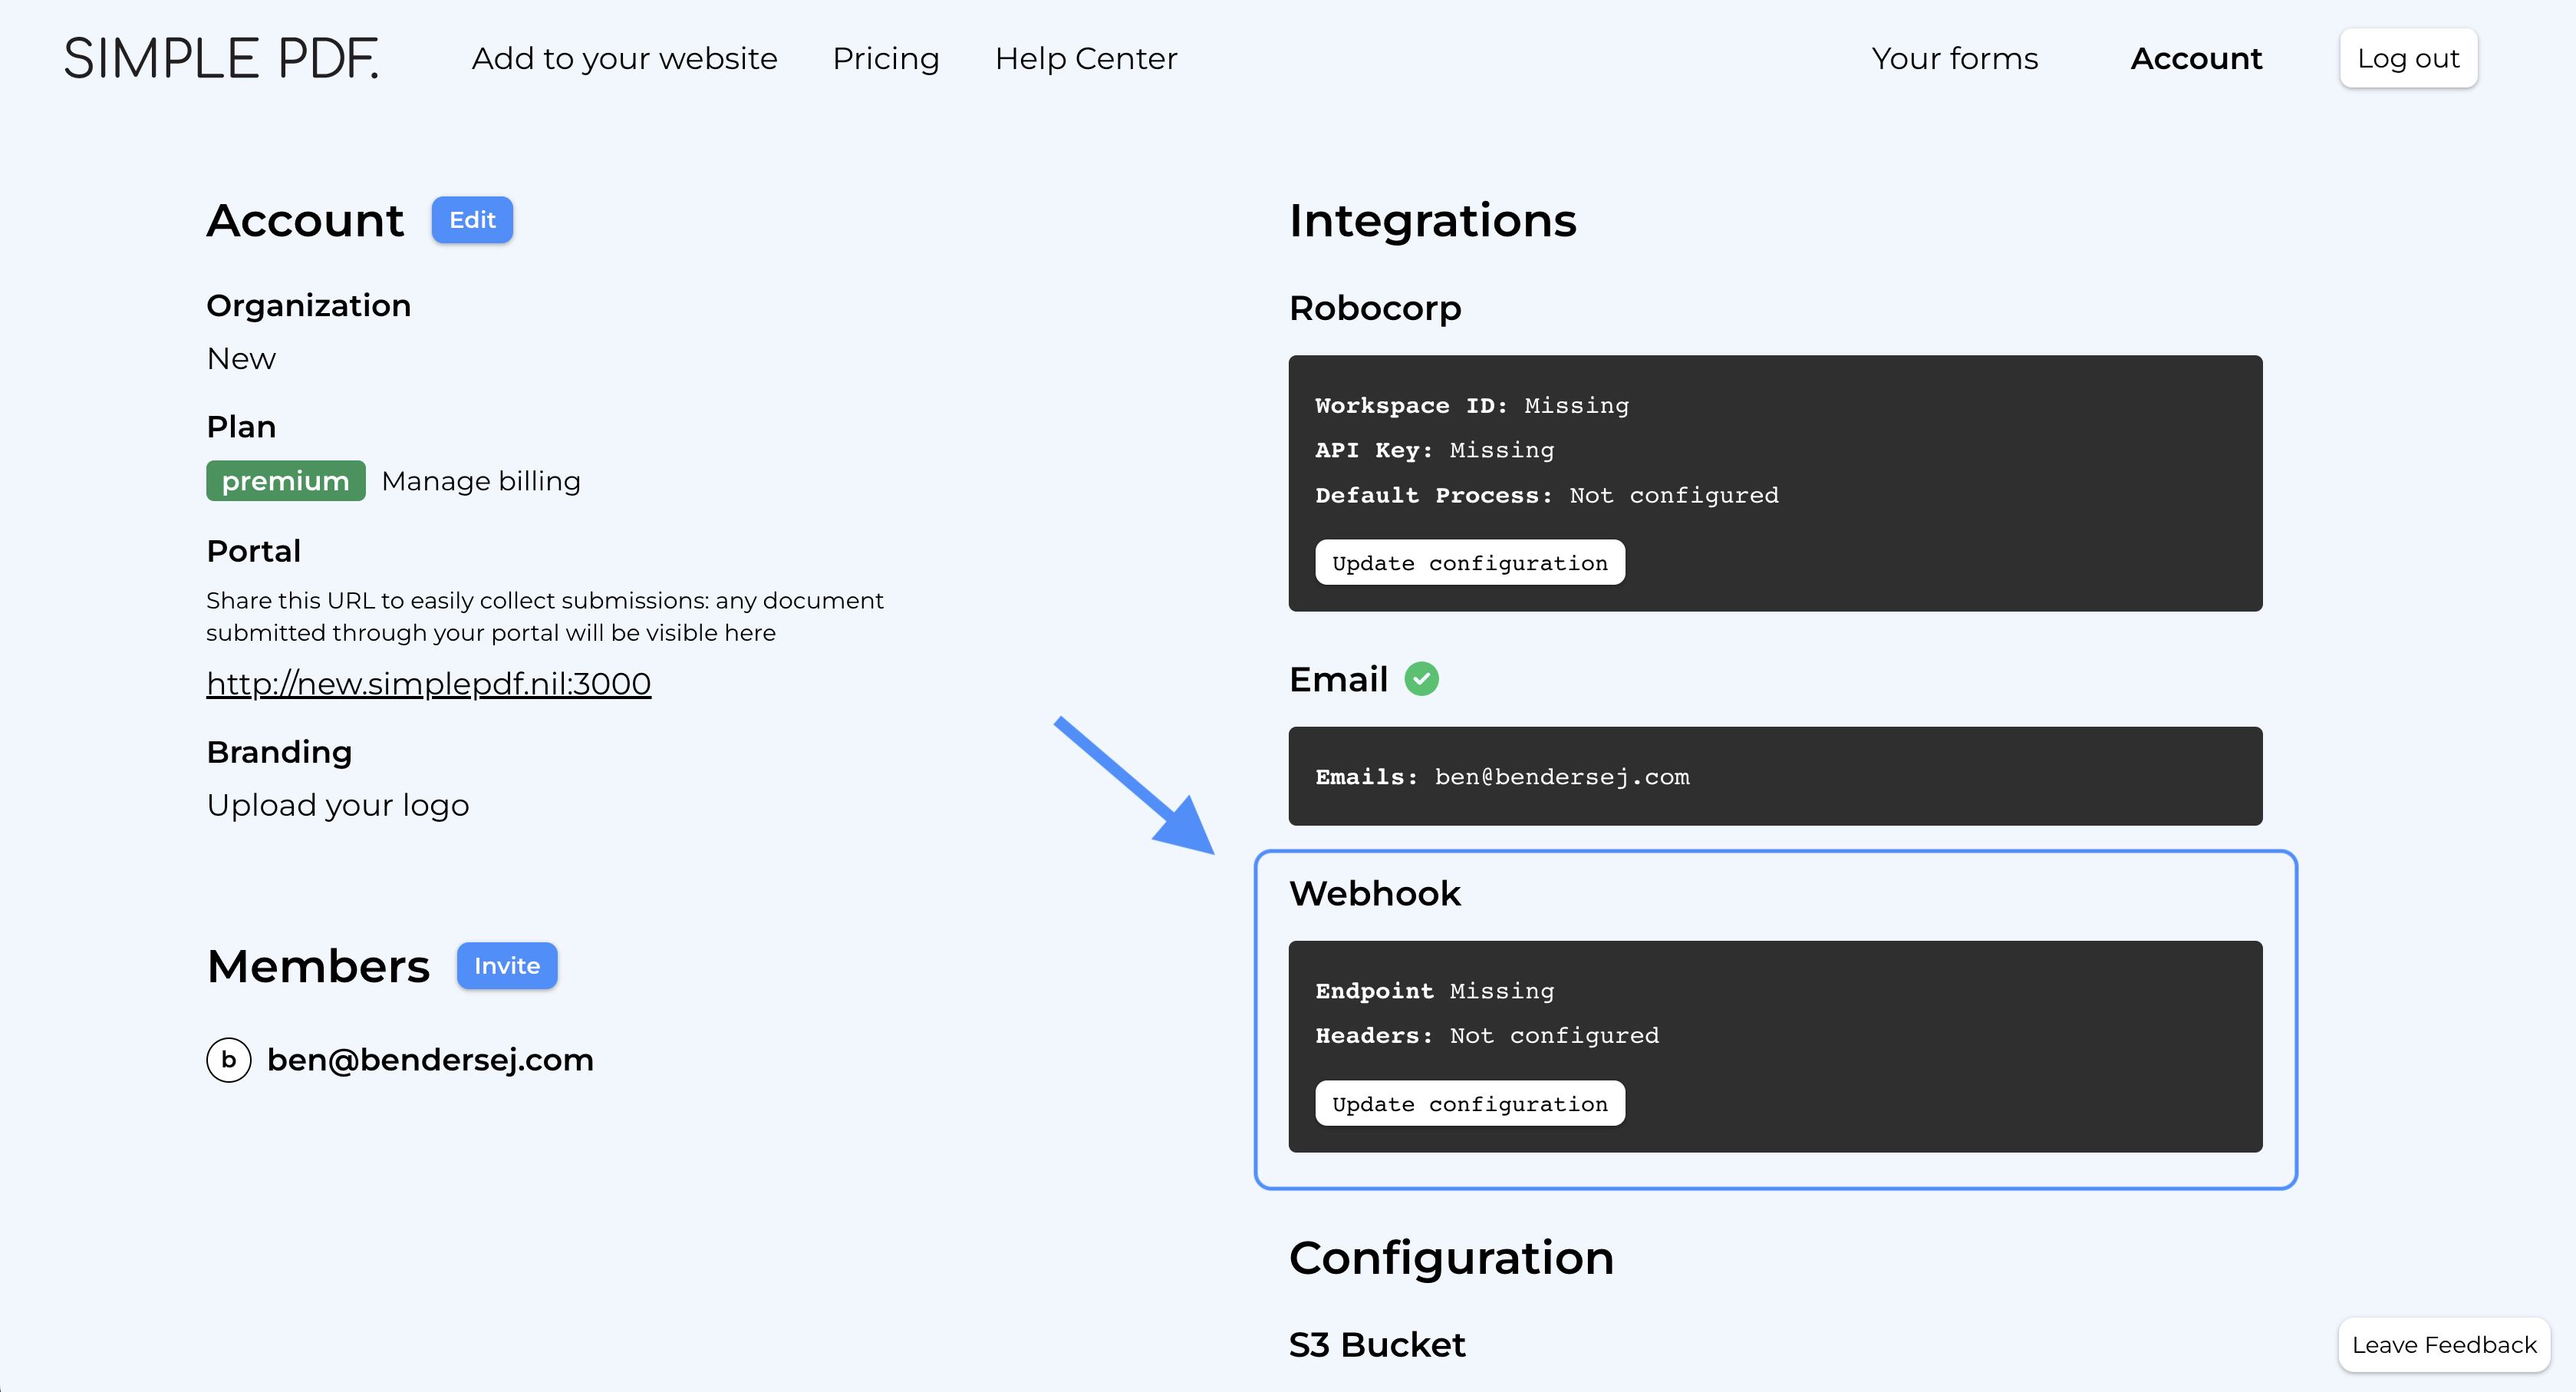 Configure webhooks in the account view